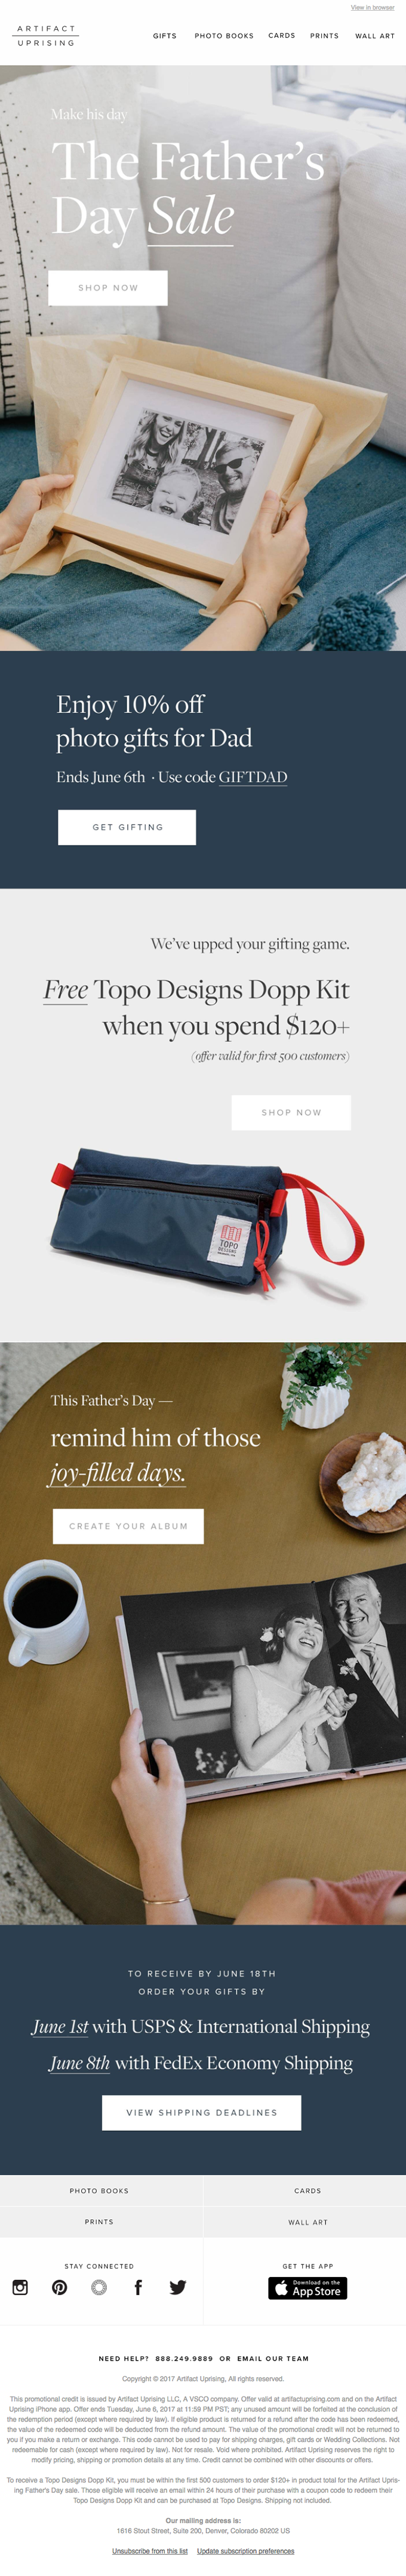 It’s Here: The Father’s Day Sale